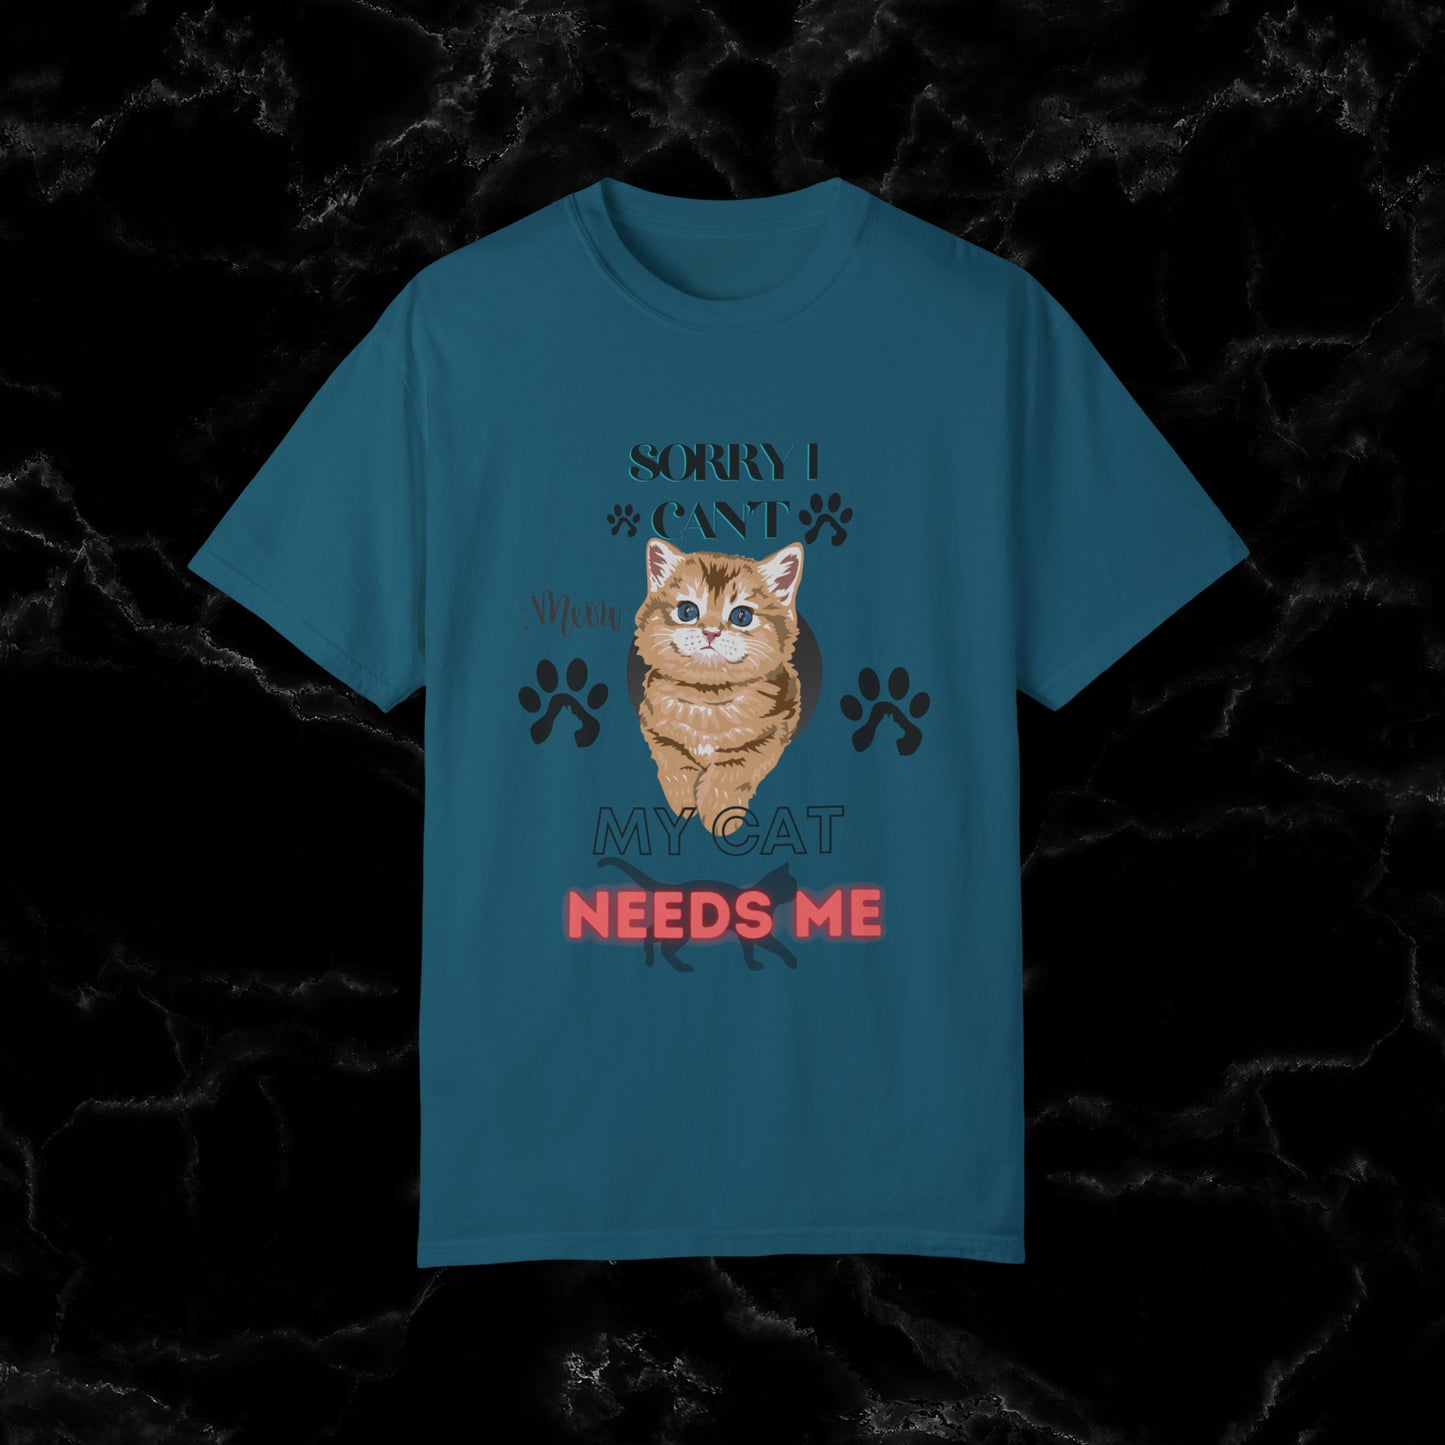 Sorry I Can't, My Cat Needs Me T-Shirt - Perfect Gift for Cat Moms and Animal Lovers T-Shirt Topaz Blue S 